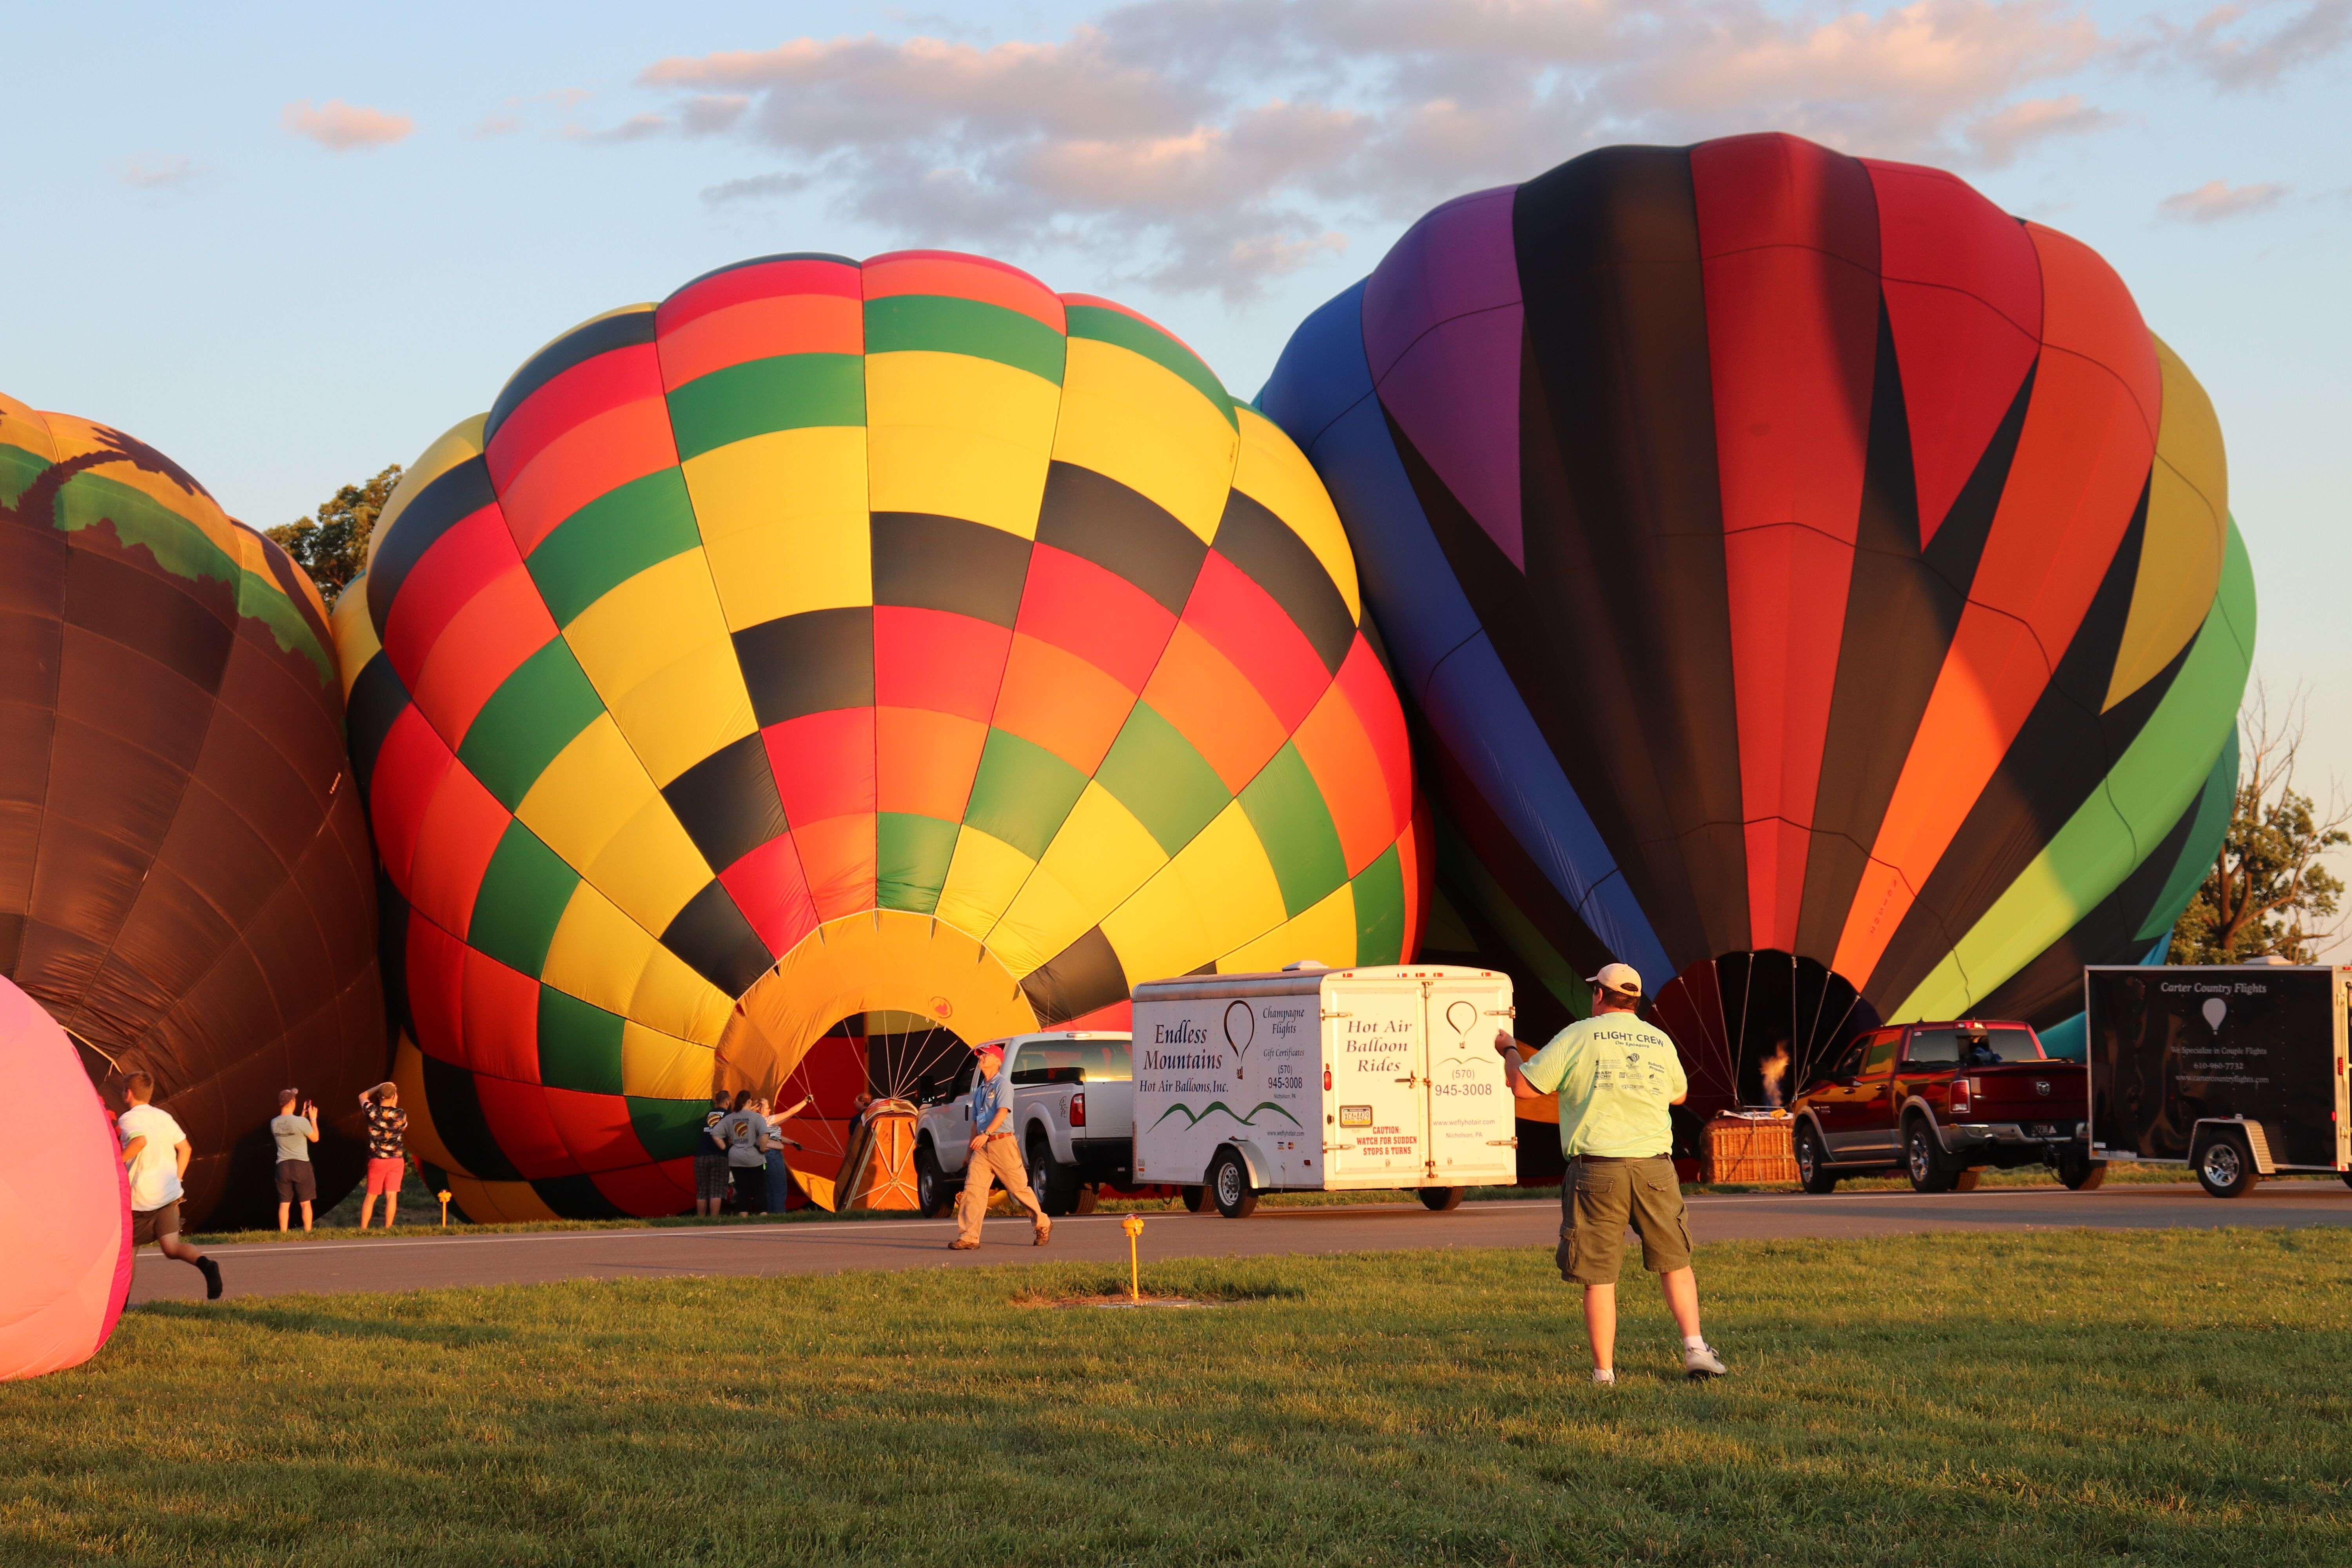 Beneath blue skies, county balloon festival attracts 27,000 Chester